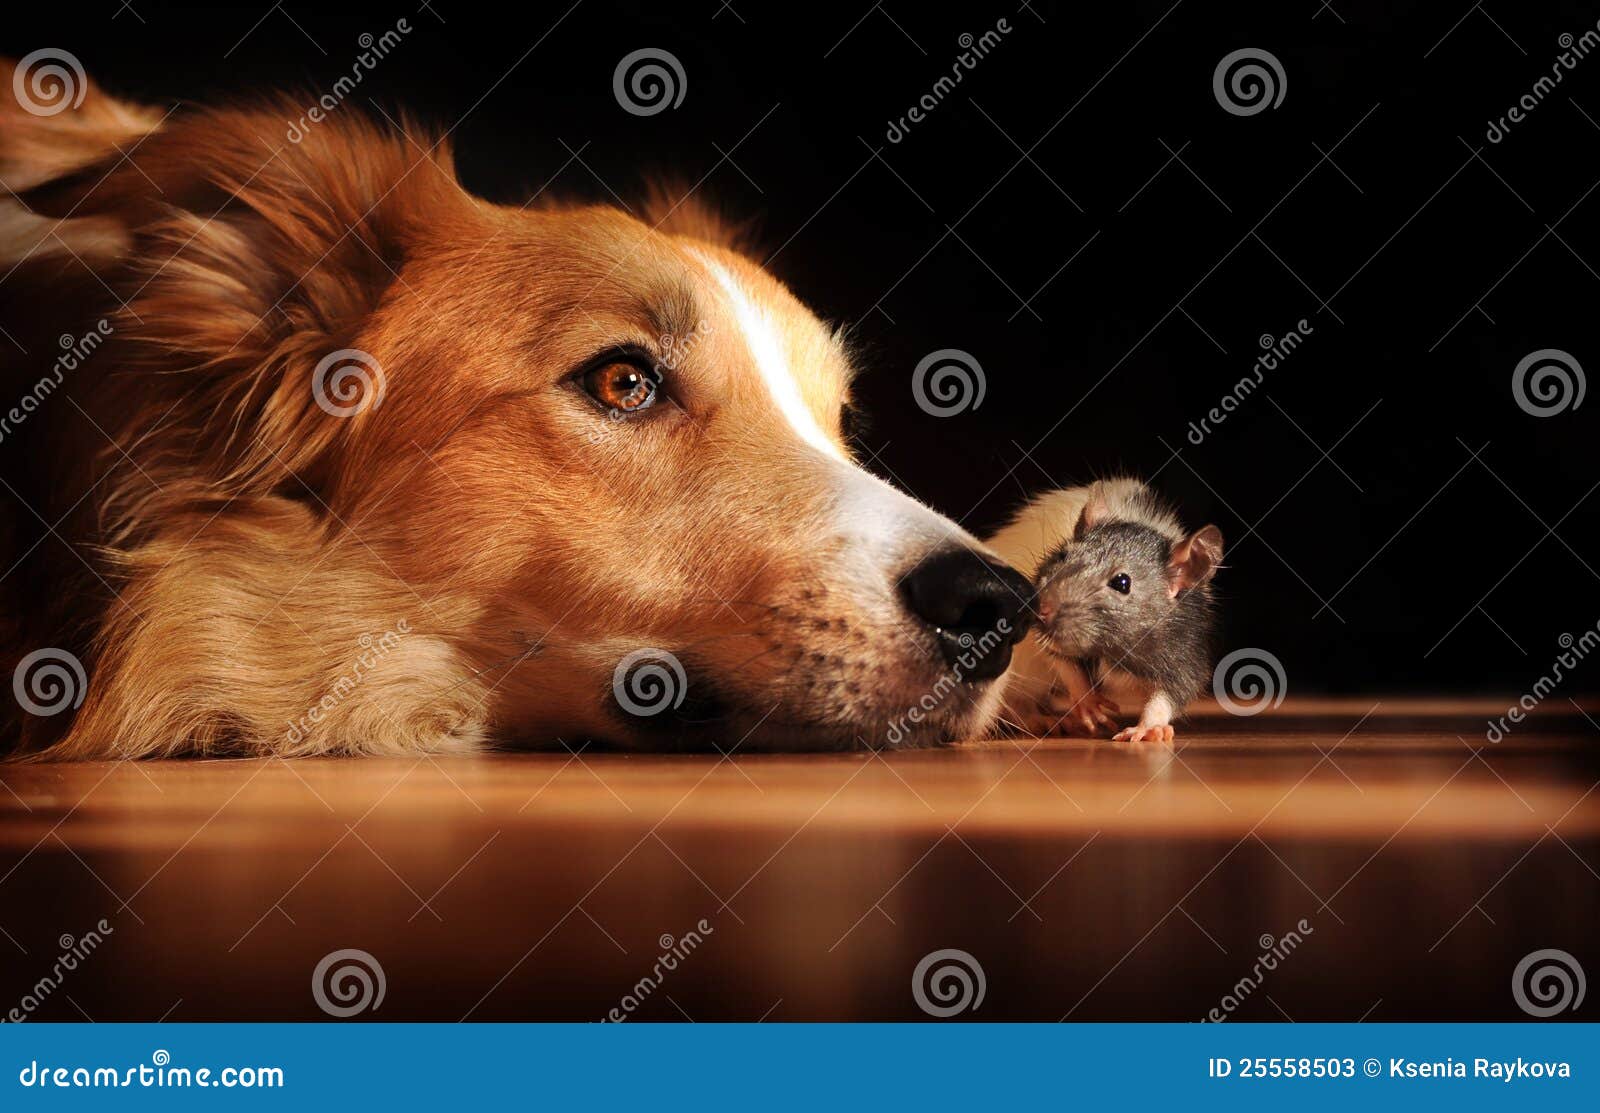 Dog and mouse friends. Dog and mouse are friends at home